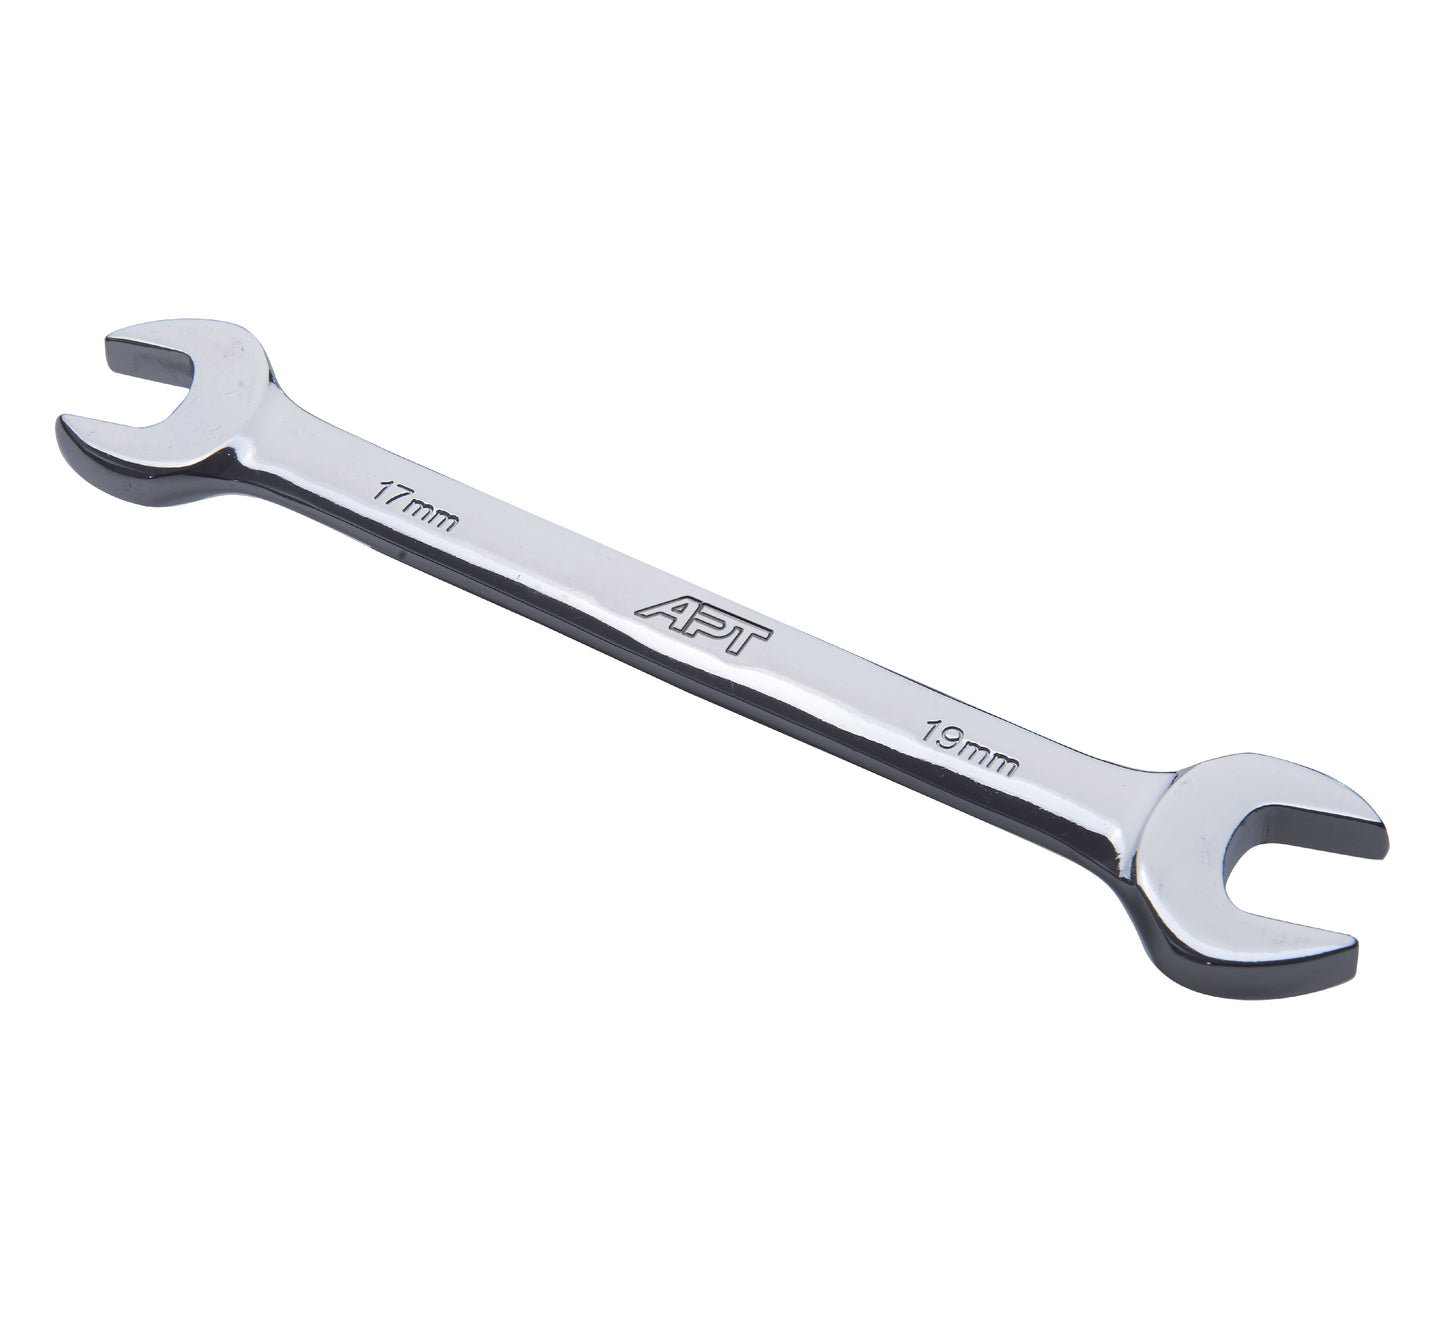 APT DOUBLE OPEN END WRENCH BRIGHT SATIN FINISH PP CARD HOLDER CR-V 06X07MM-AH251401-06X07